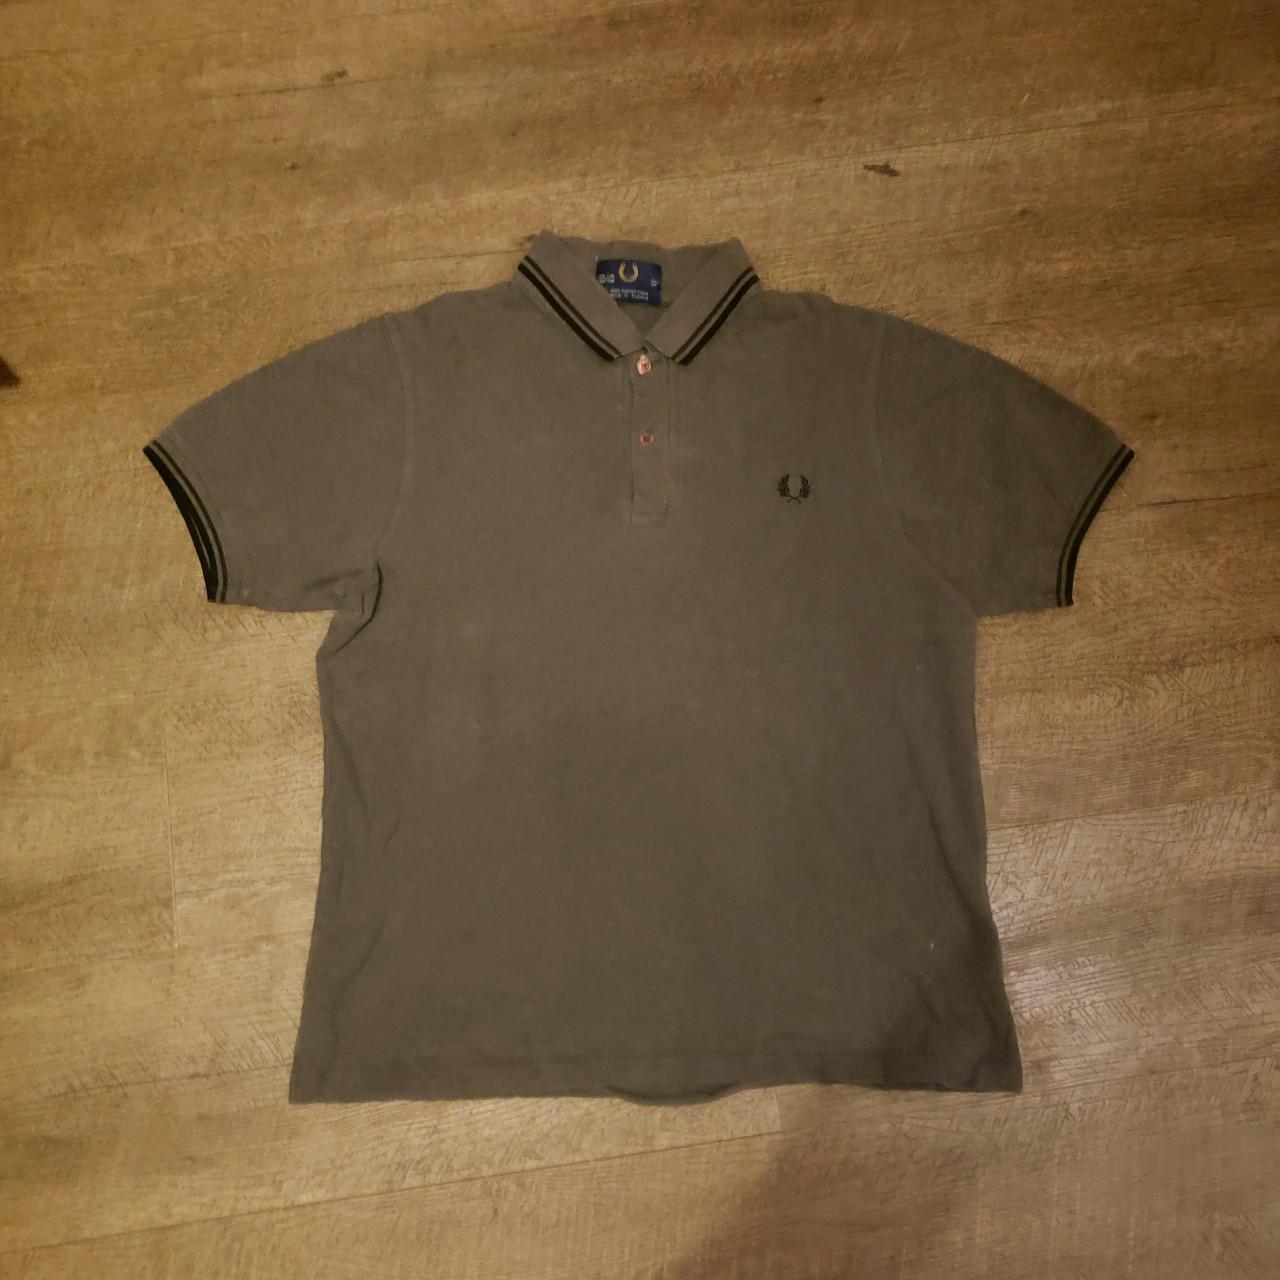 Fred perry grey polo shirt 42 large - Depop